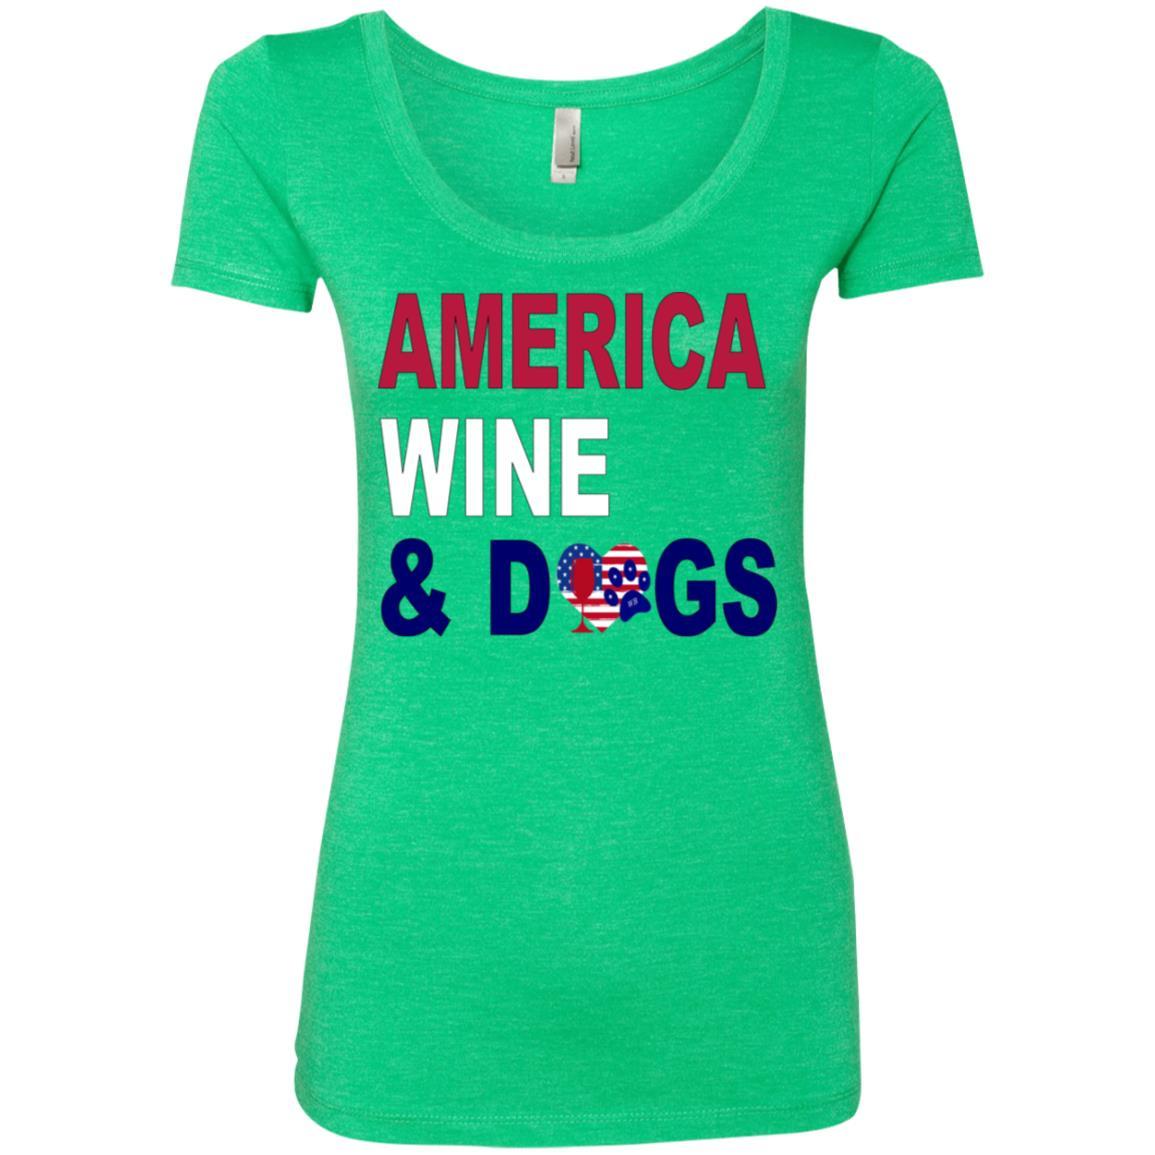 T-Shirts Envy / S WineyBitches.Co America Wine and Dogs Ladies' Triblend Scoop WineyBitchesCo